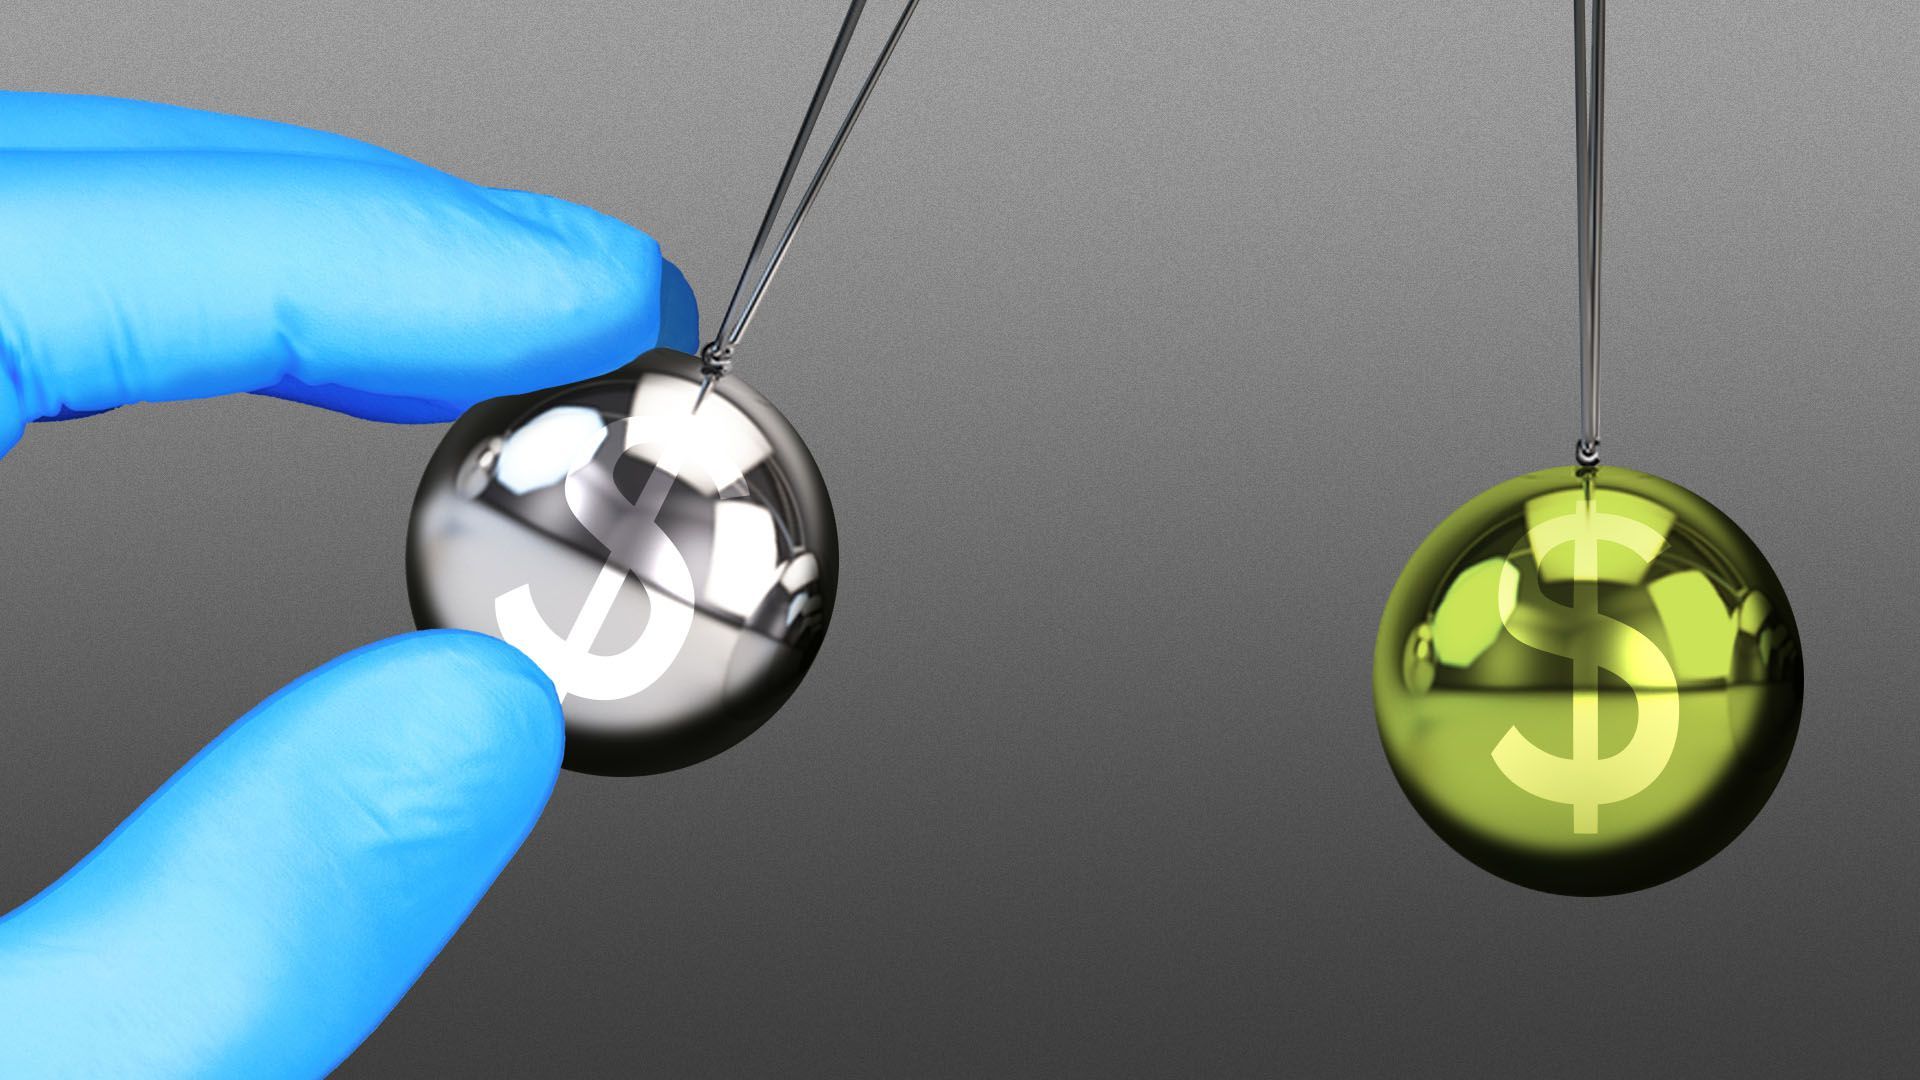 Illustration of hands in medical gloves holding a ball on a Newton's cradle with a dollar sign on it.